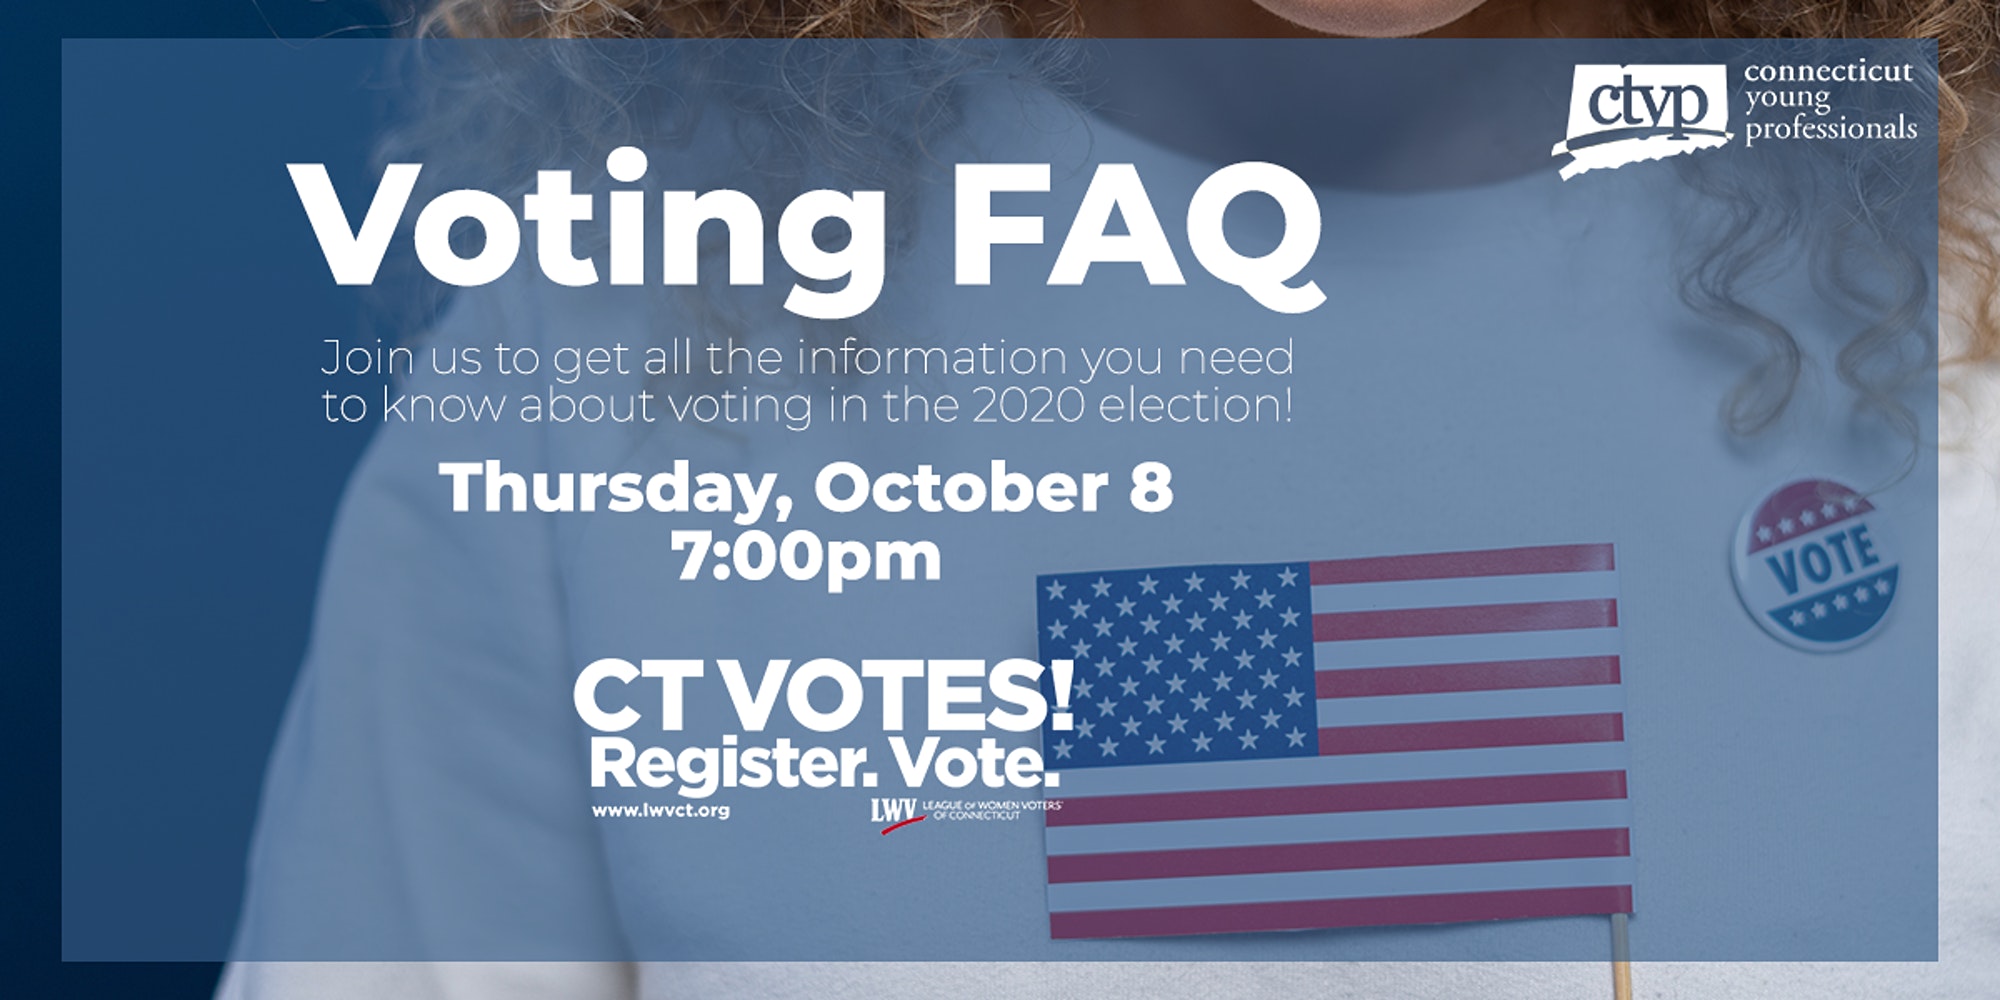 Voting FAQs with LWVCT and CT Young Professionals Event Flyer Oct 8